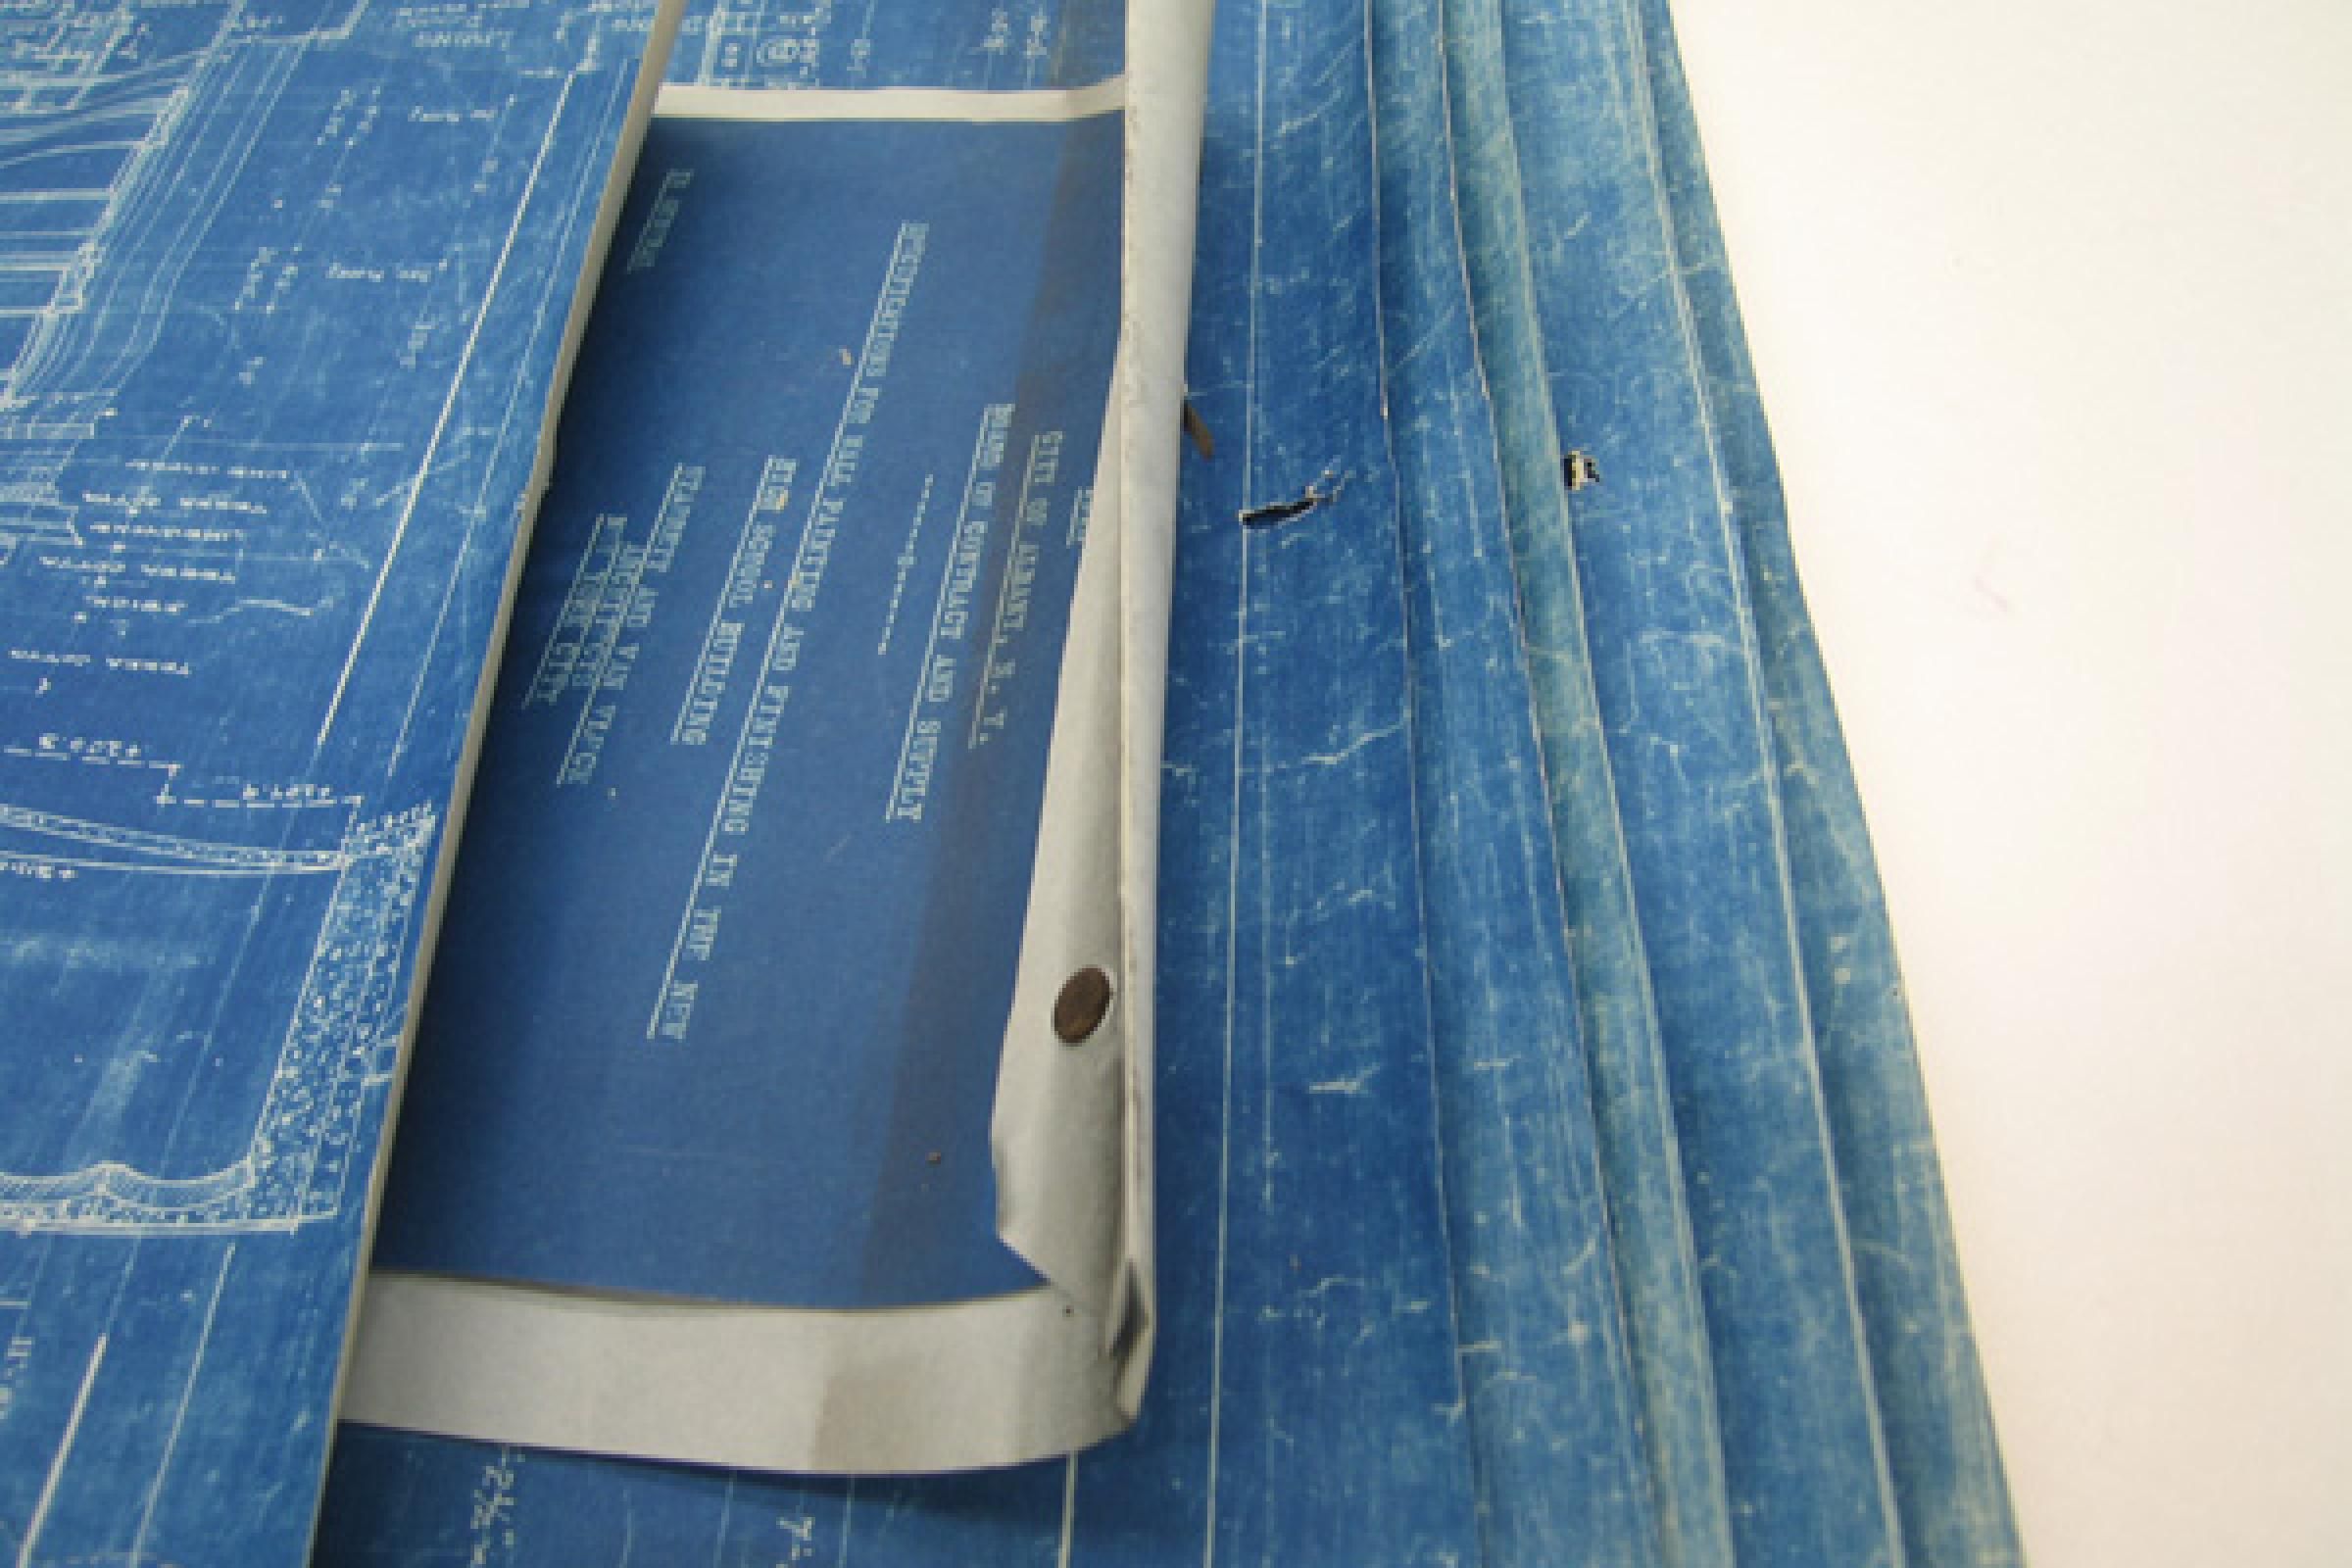 Detail of blueprints and contract documents